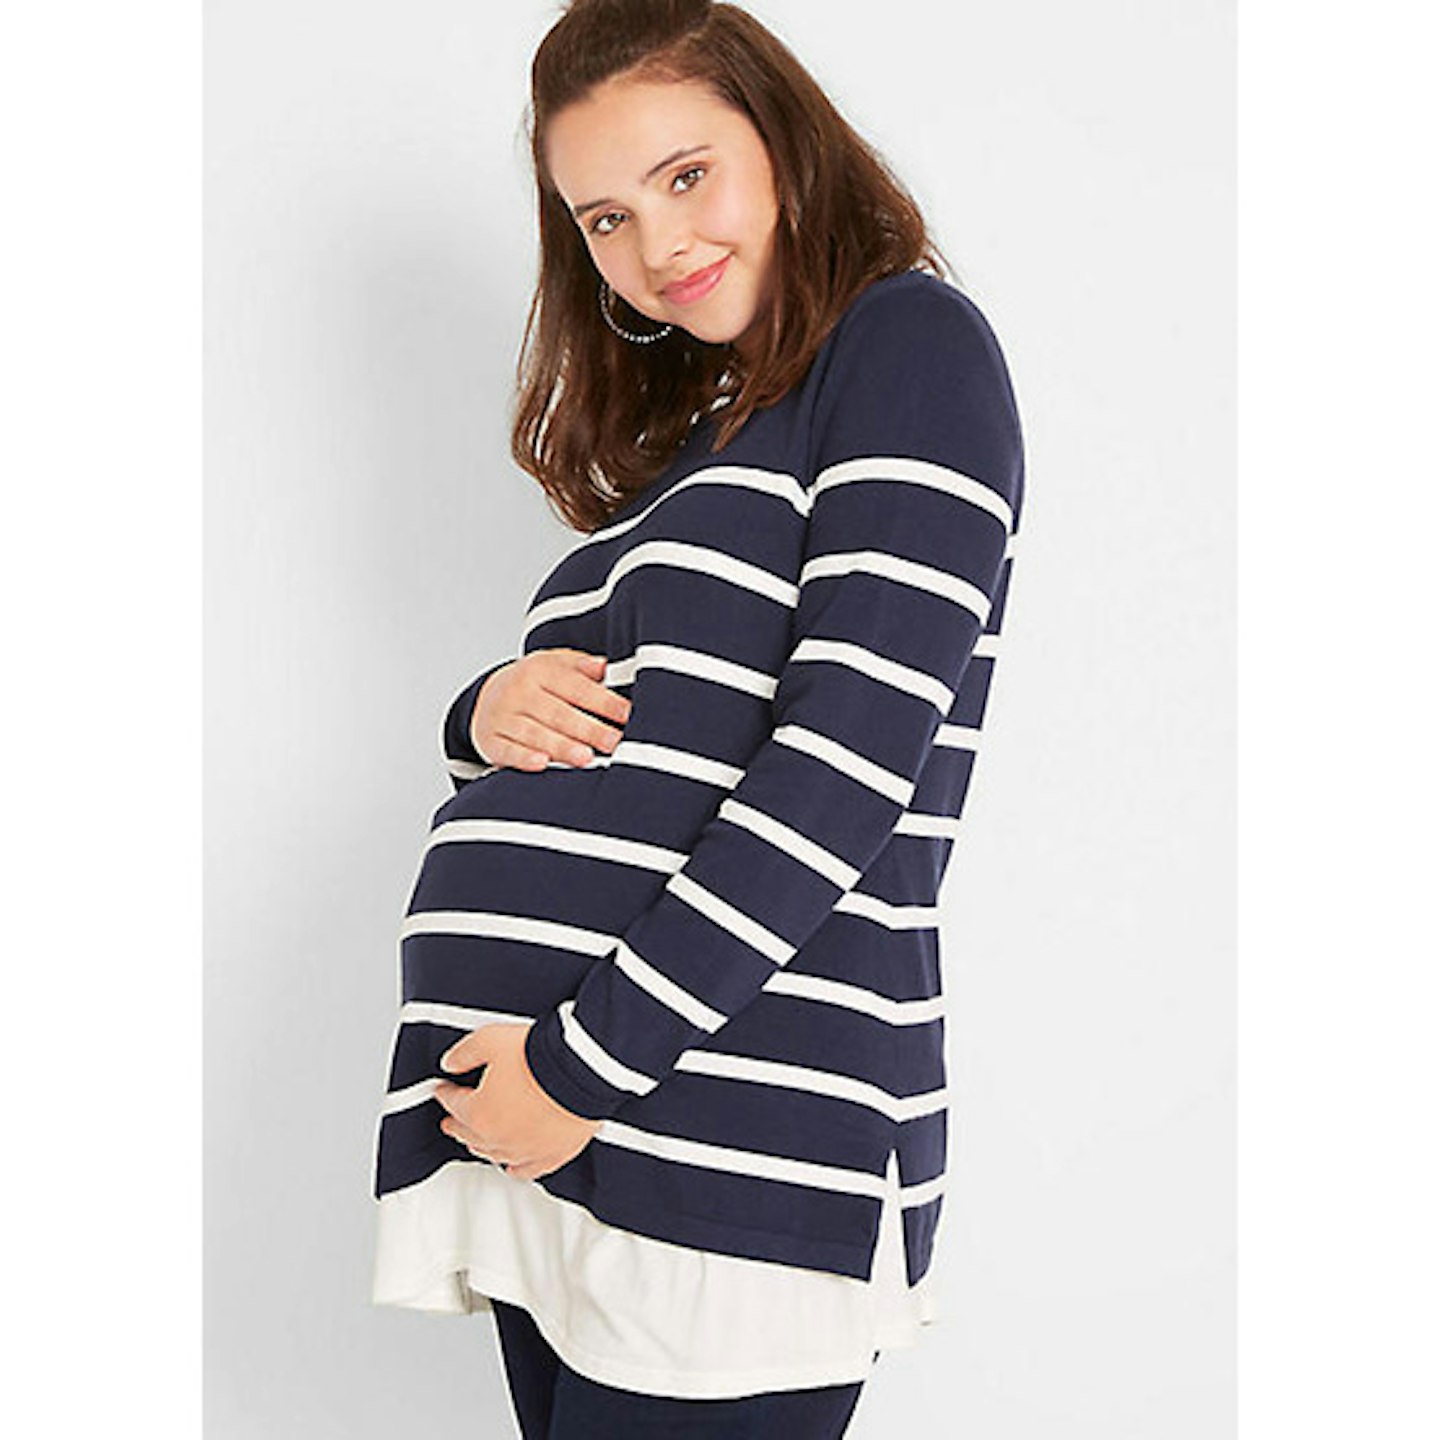 Striped Maternity Jumper - plus size maternity clothes